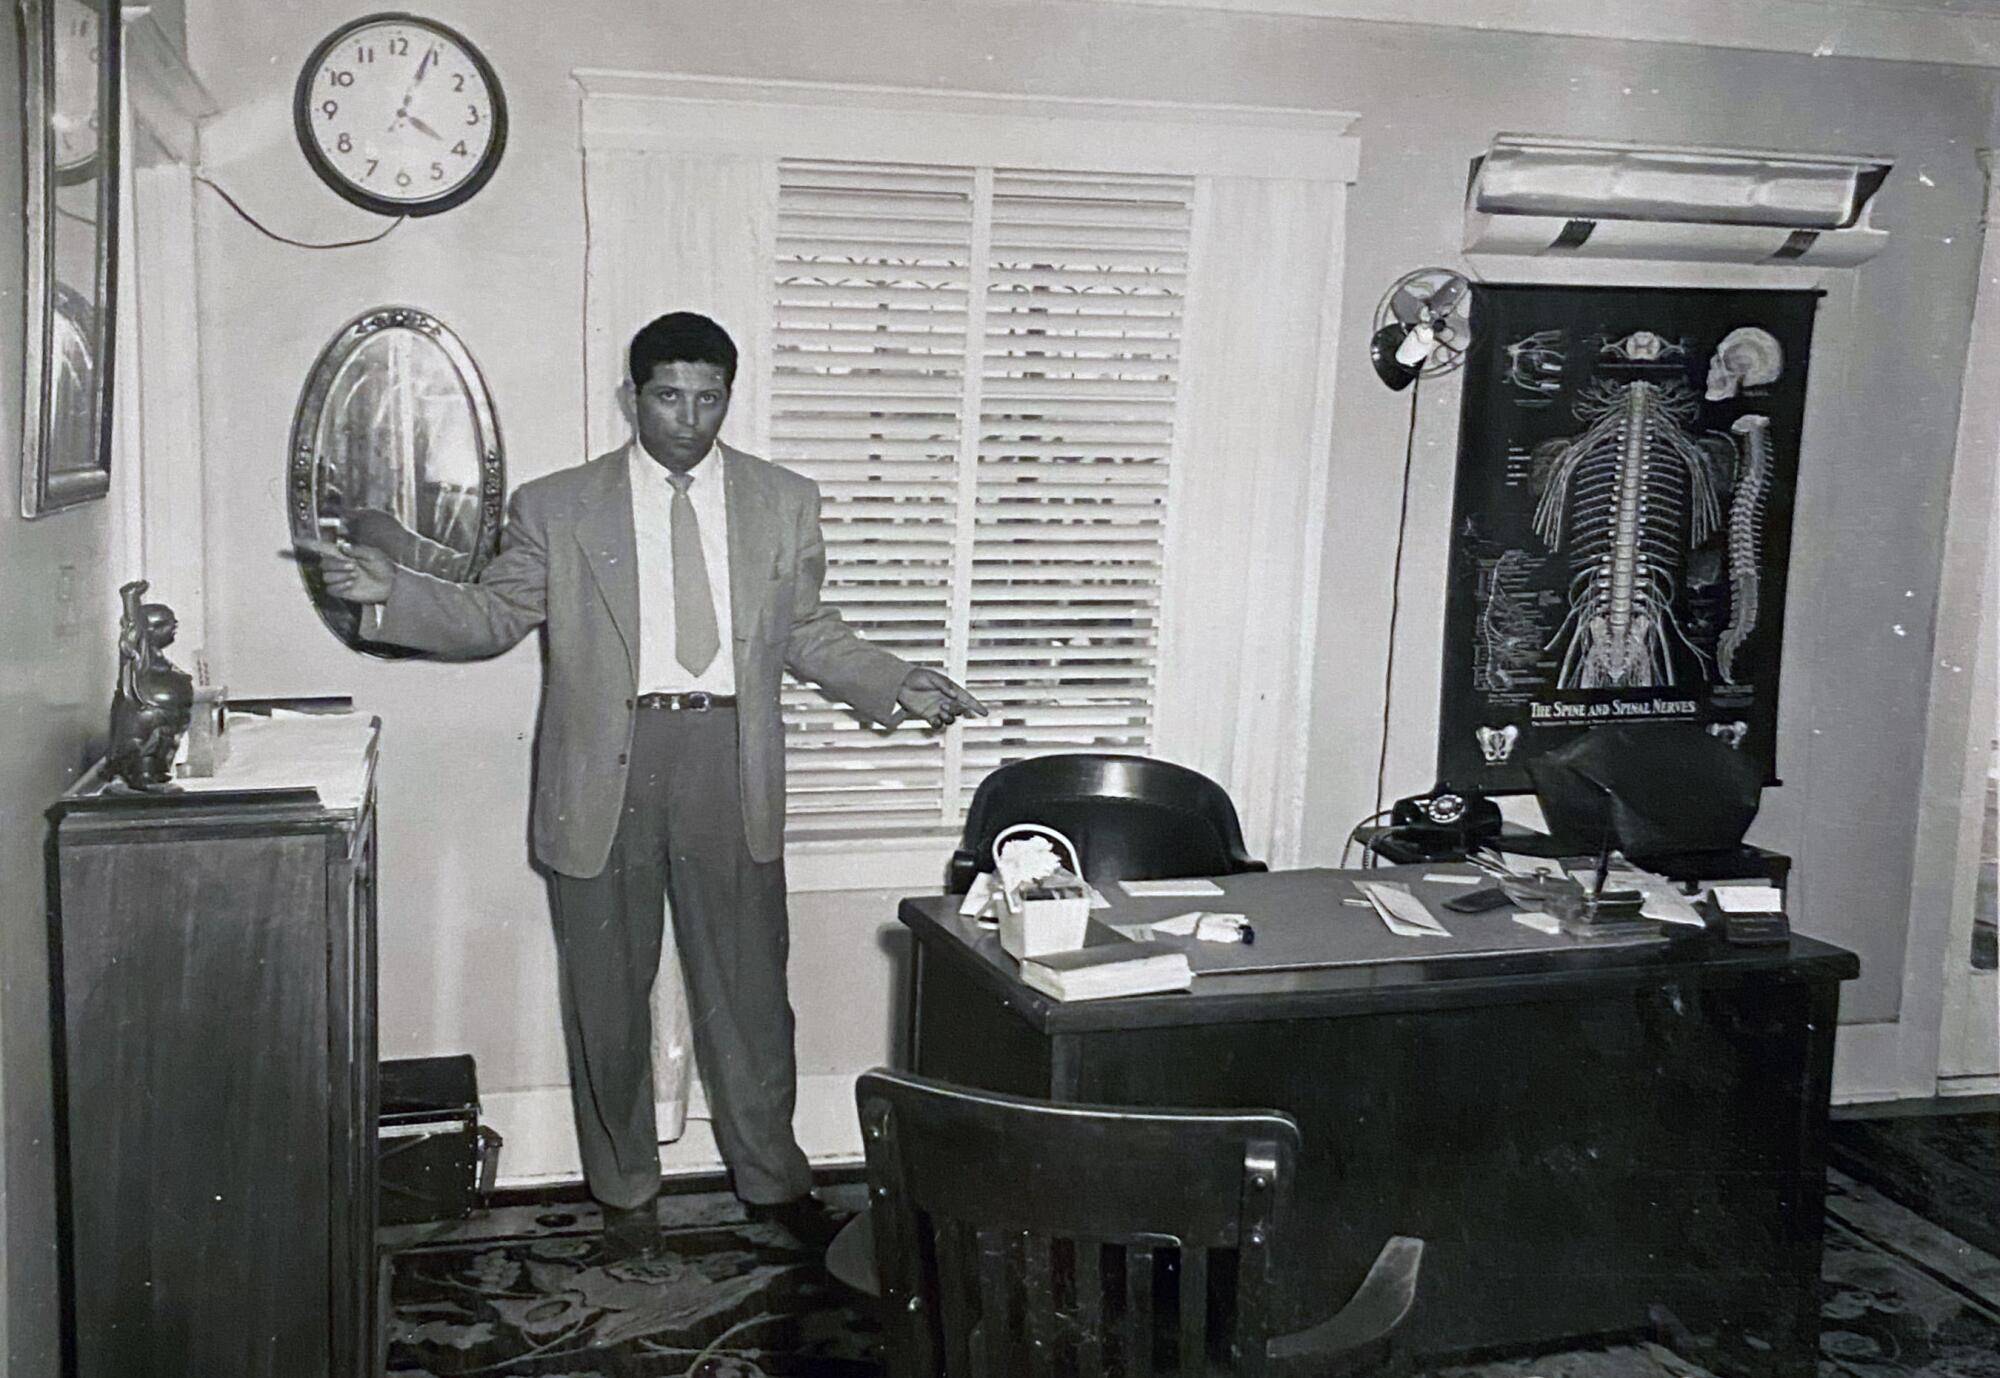 Danny Galindo wearing a 1960s-style light suit and light tie standing beside a desk and other bedroom furniture.